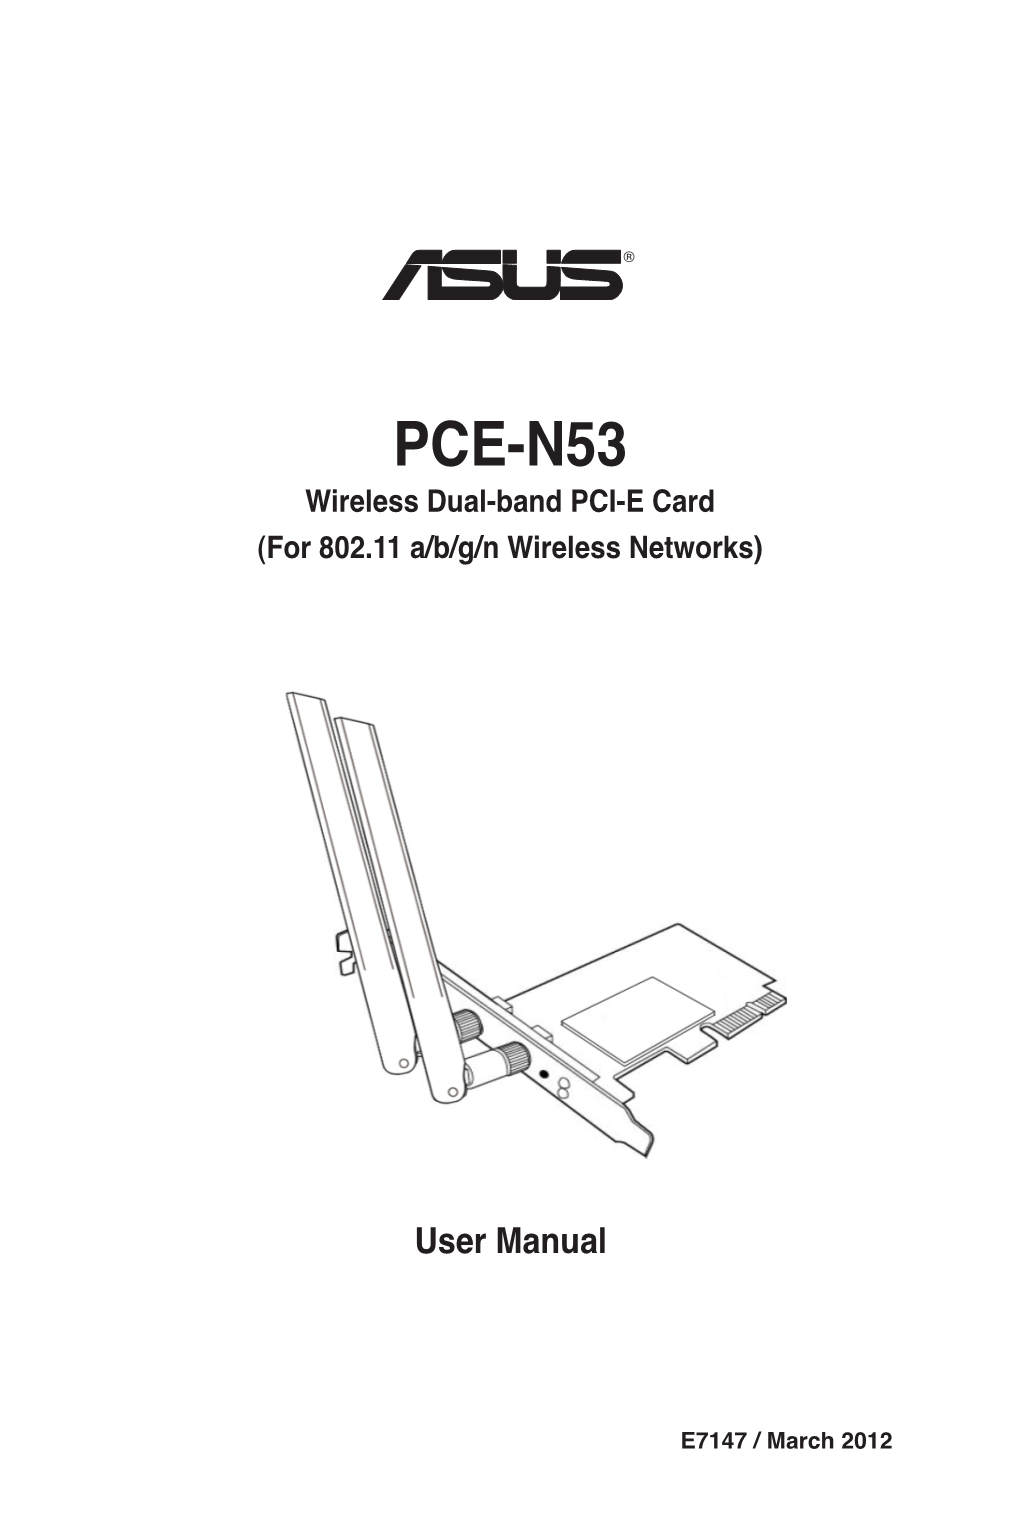 PCE-N53 Wireless Dual-Band PCI-E Card (For 802.11 A/B/G/N Wireless Networks)